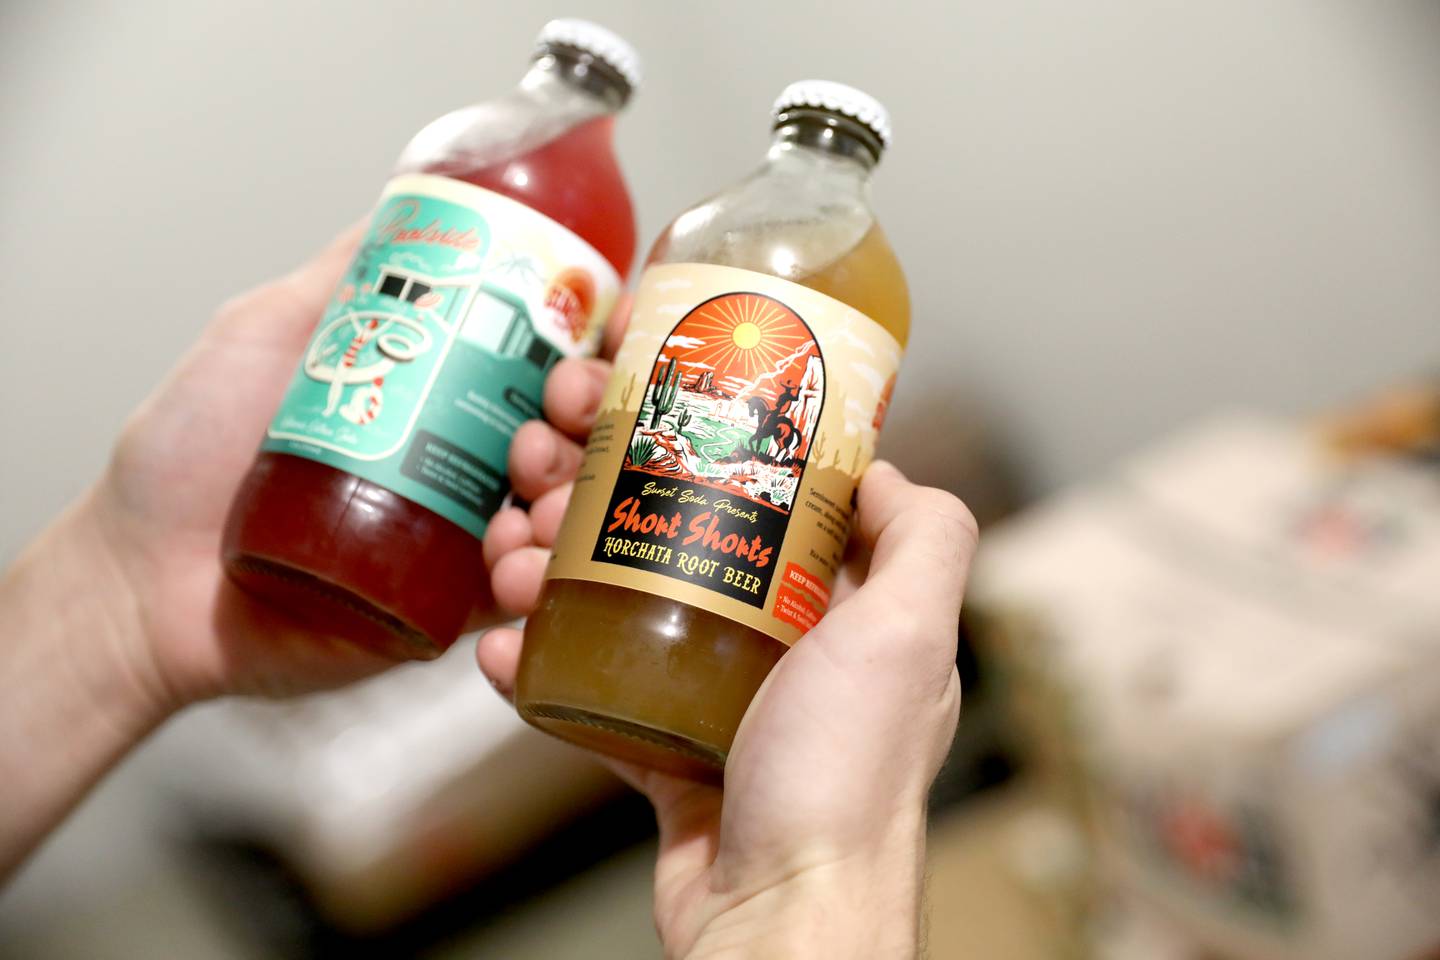 Sunset Soda co-founders Frank Schiffner (left) and Josh Carnell began producing small-batch artisanal sodas last March.